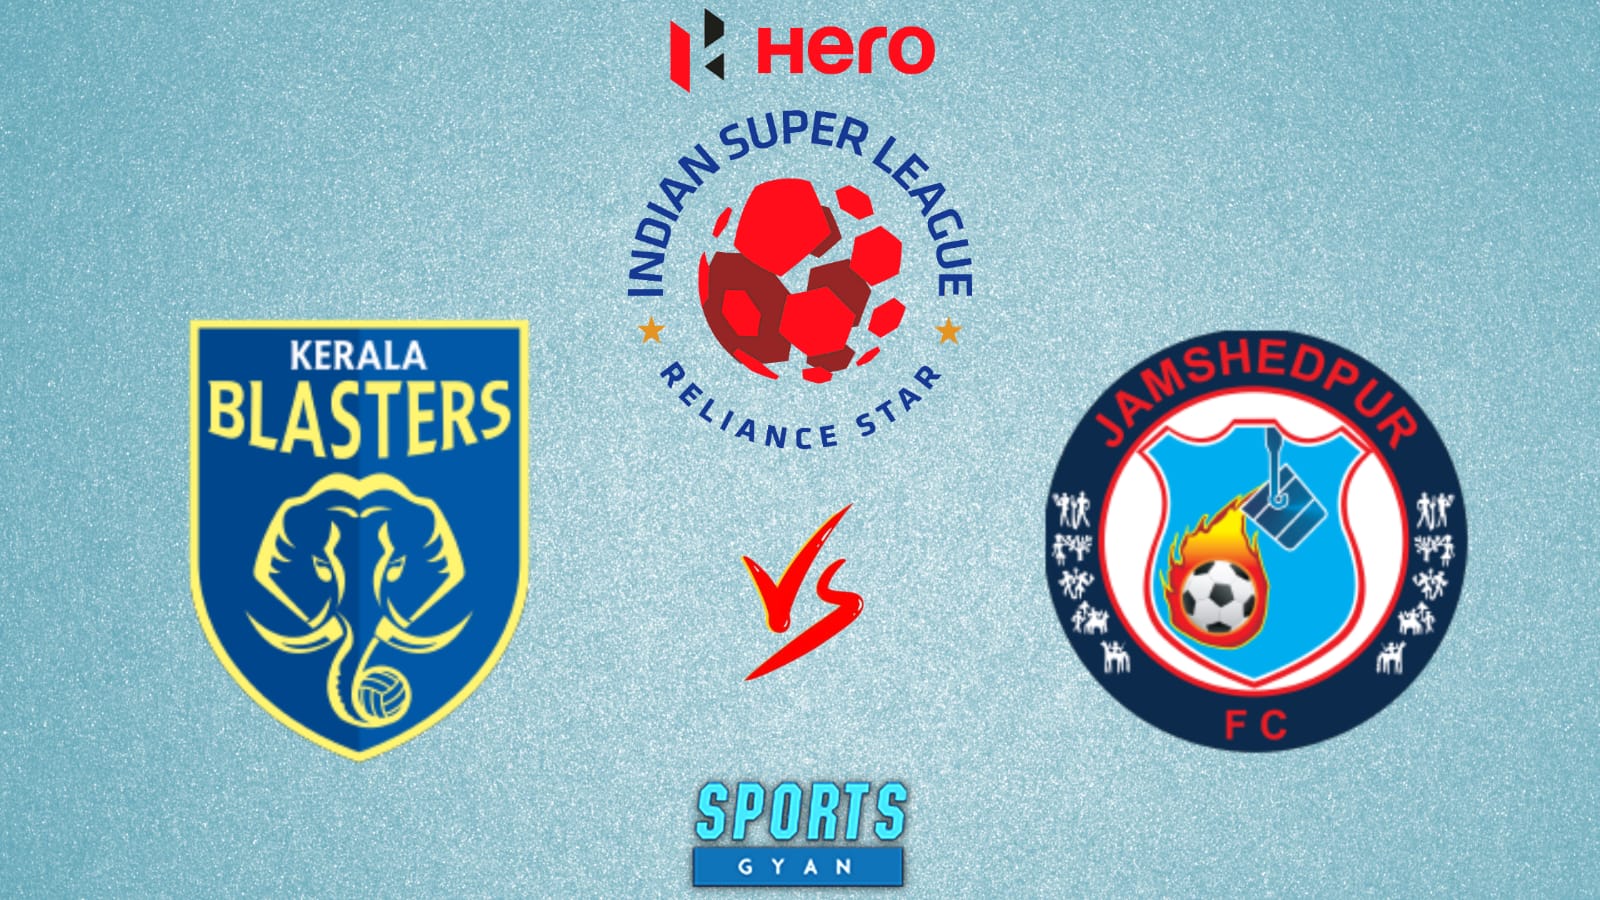 KBFC vs JFC Dream11 Prediction, Player stats, Pitch Report, Injury updates & Dream11 Team for Today Match.